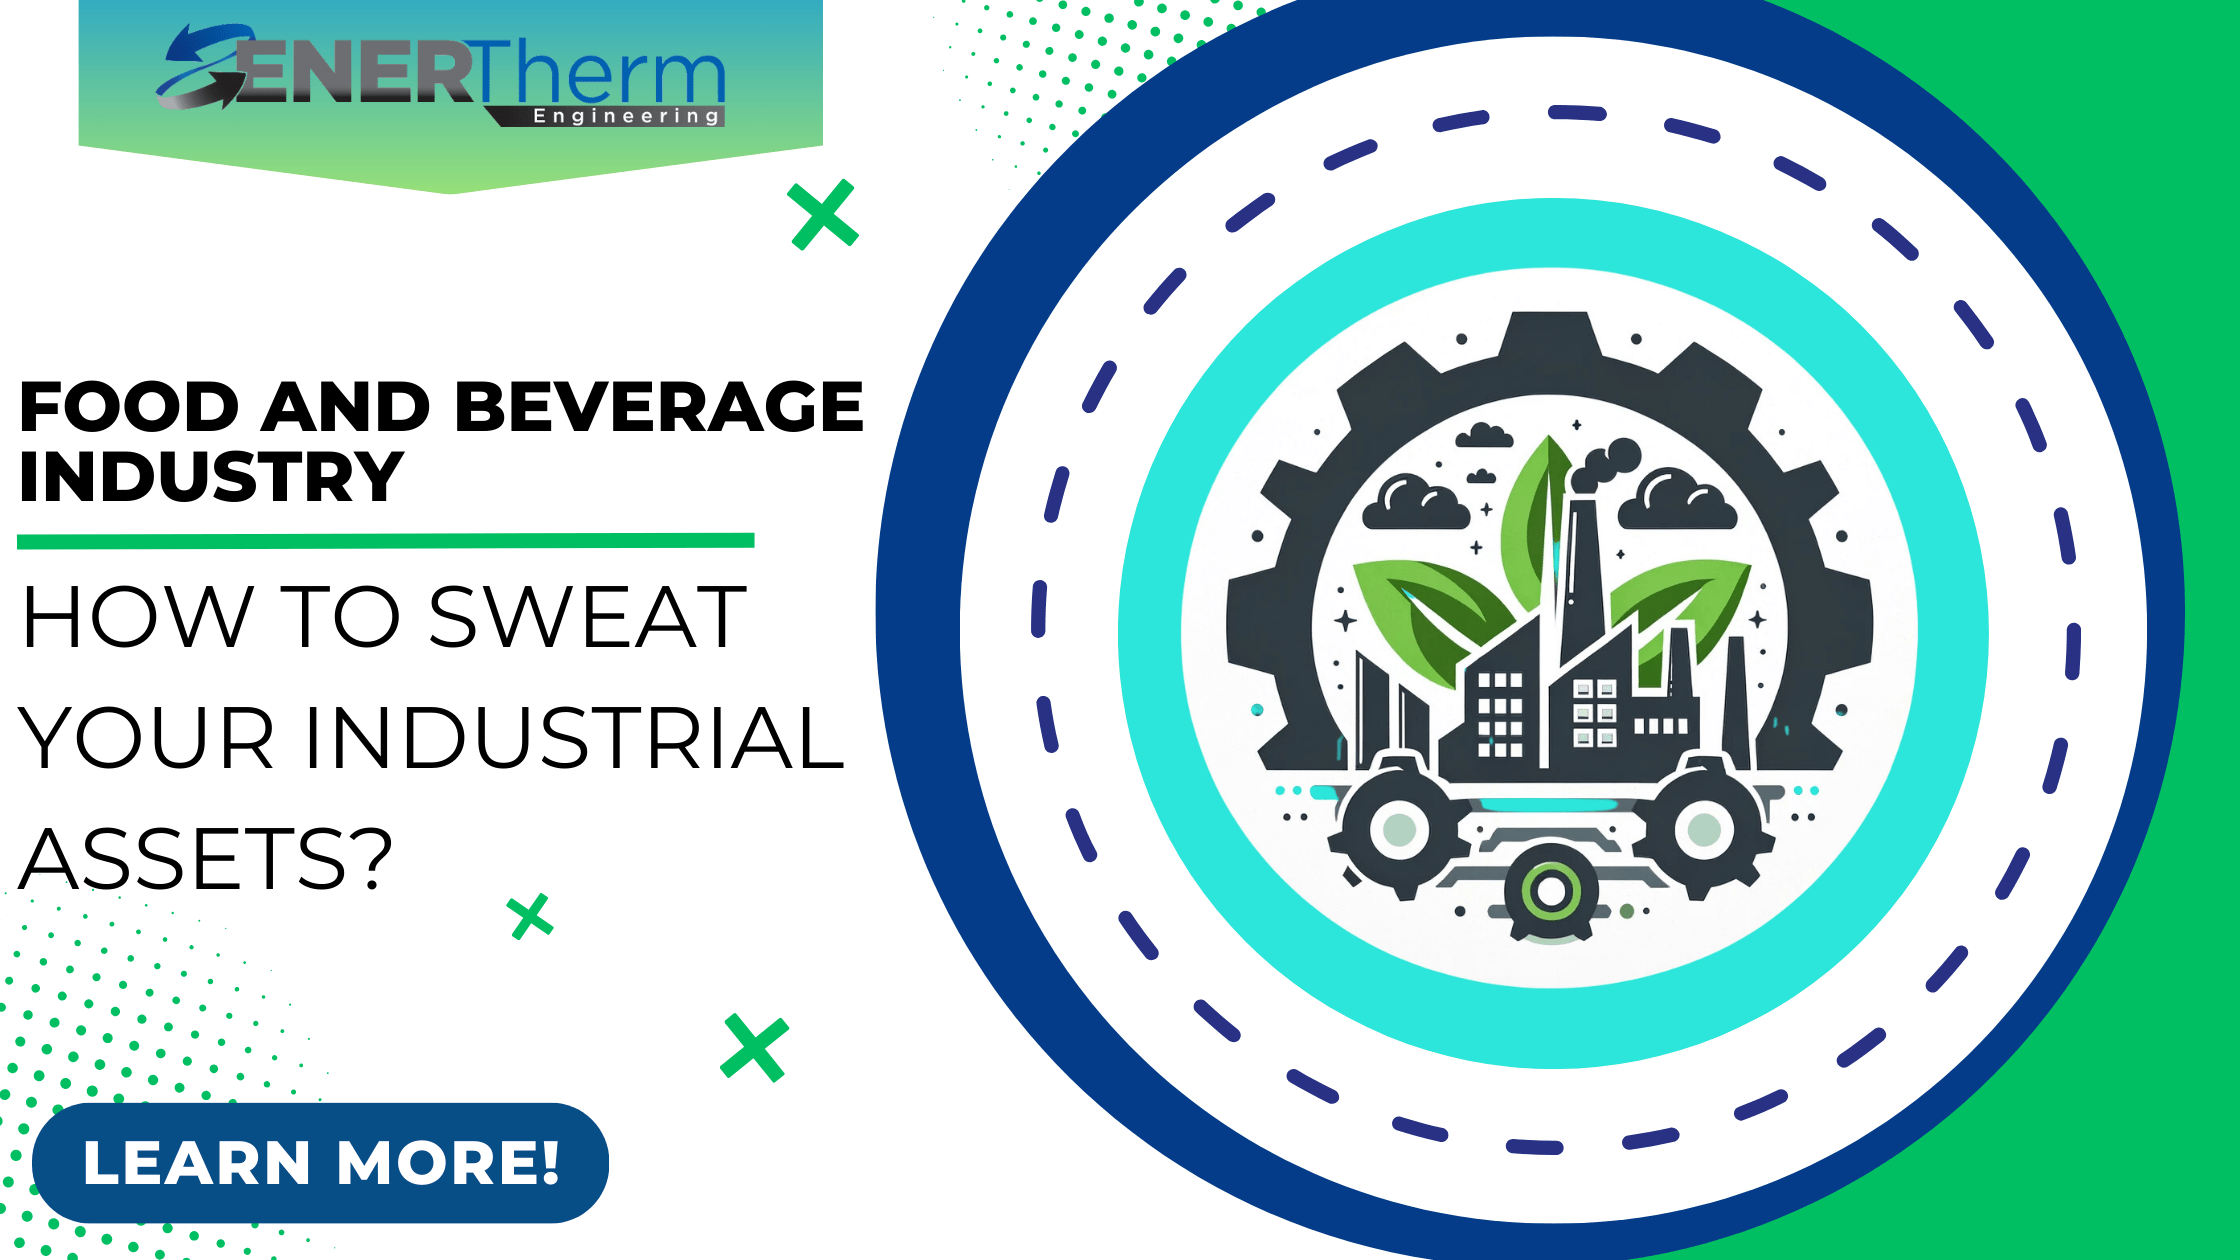 How to Sweat Your Industrial Assets in the Food and Beverage Industry